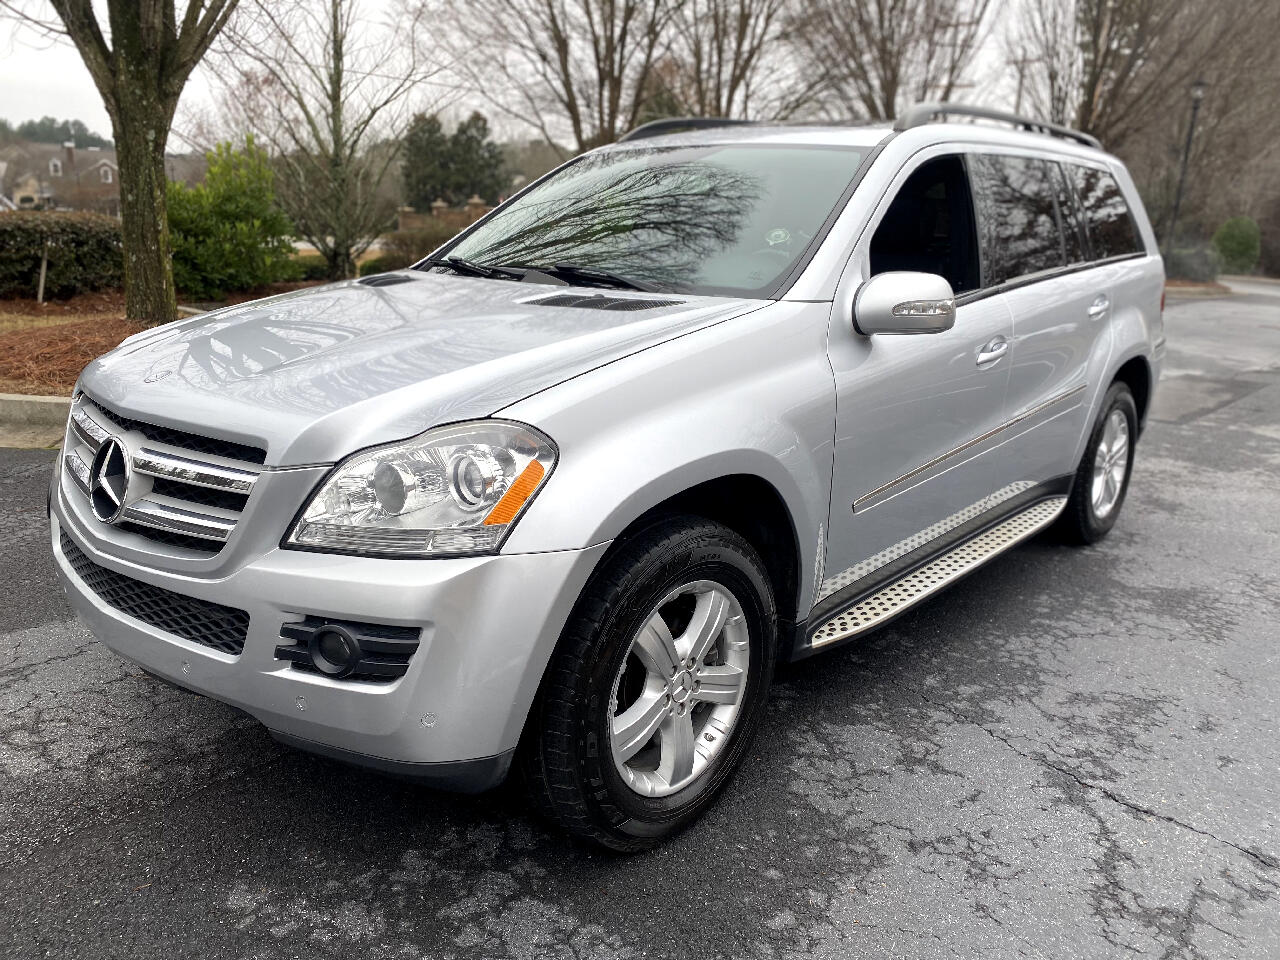 Used 2007 Mercedes-Benz GL-Class GL450 for Sale in Duluth GA 30097 Johnson  Automotive Group, Inc.